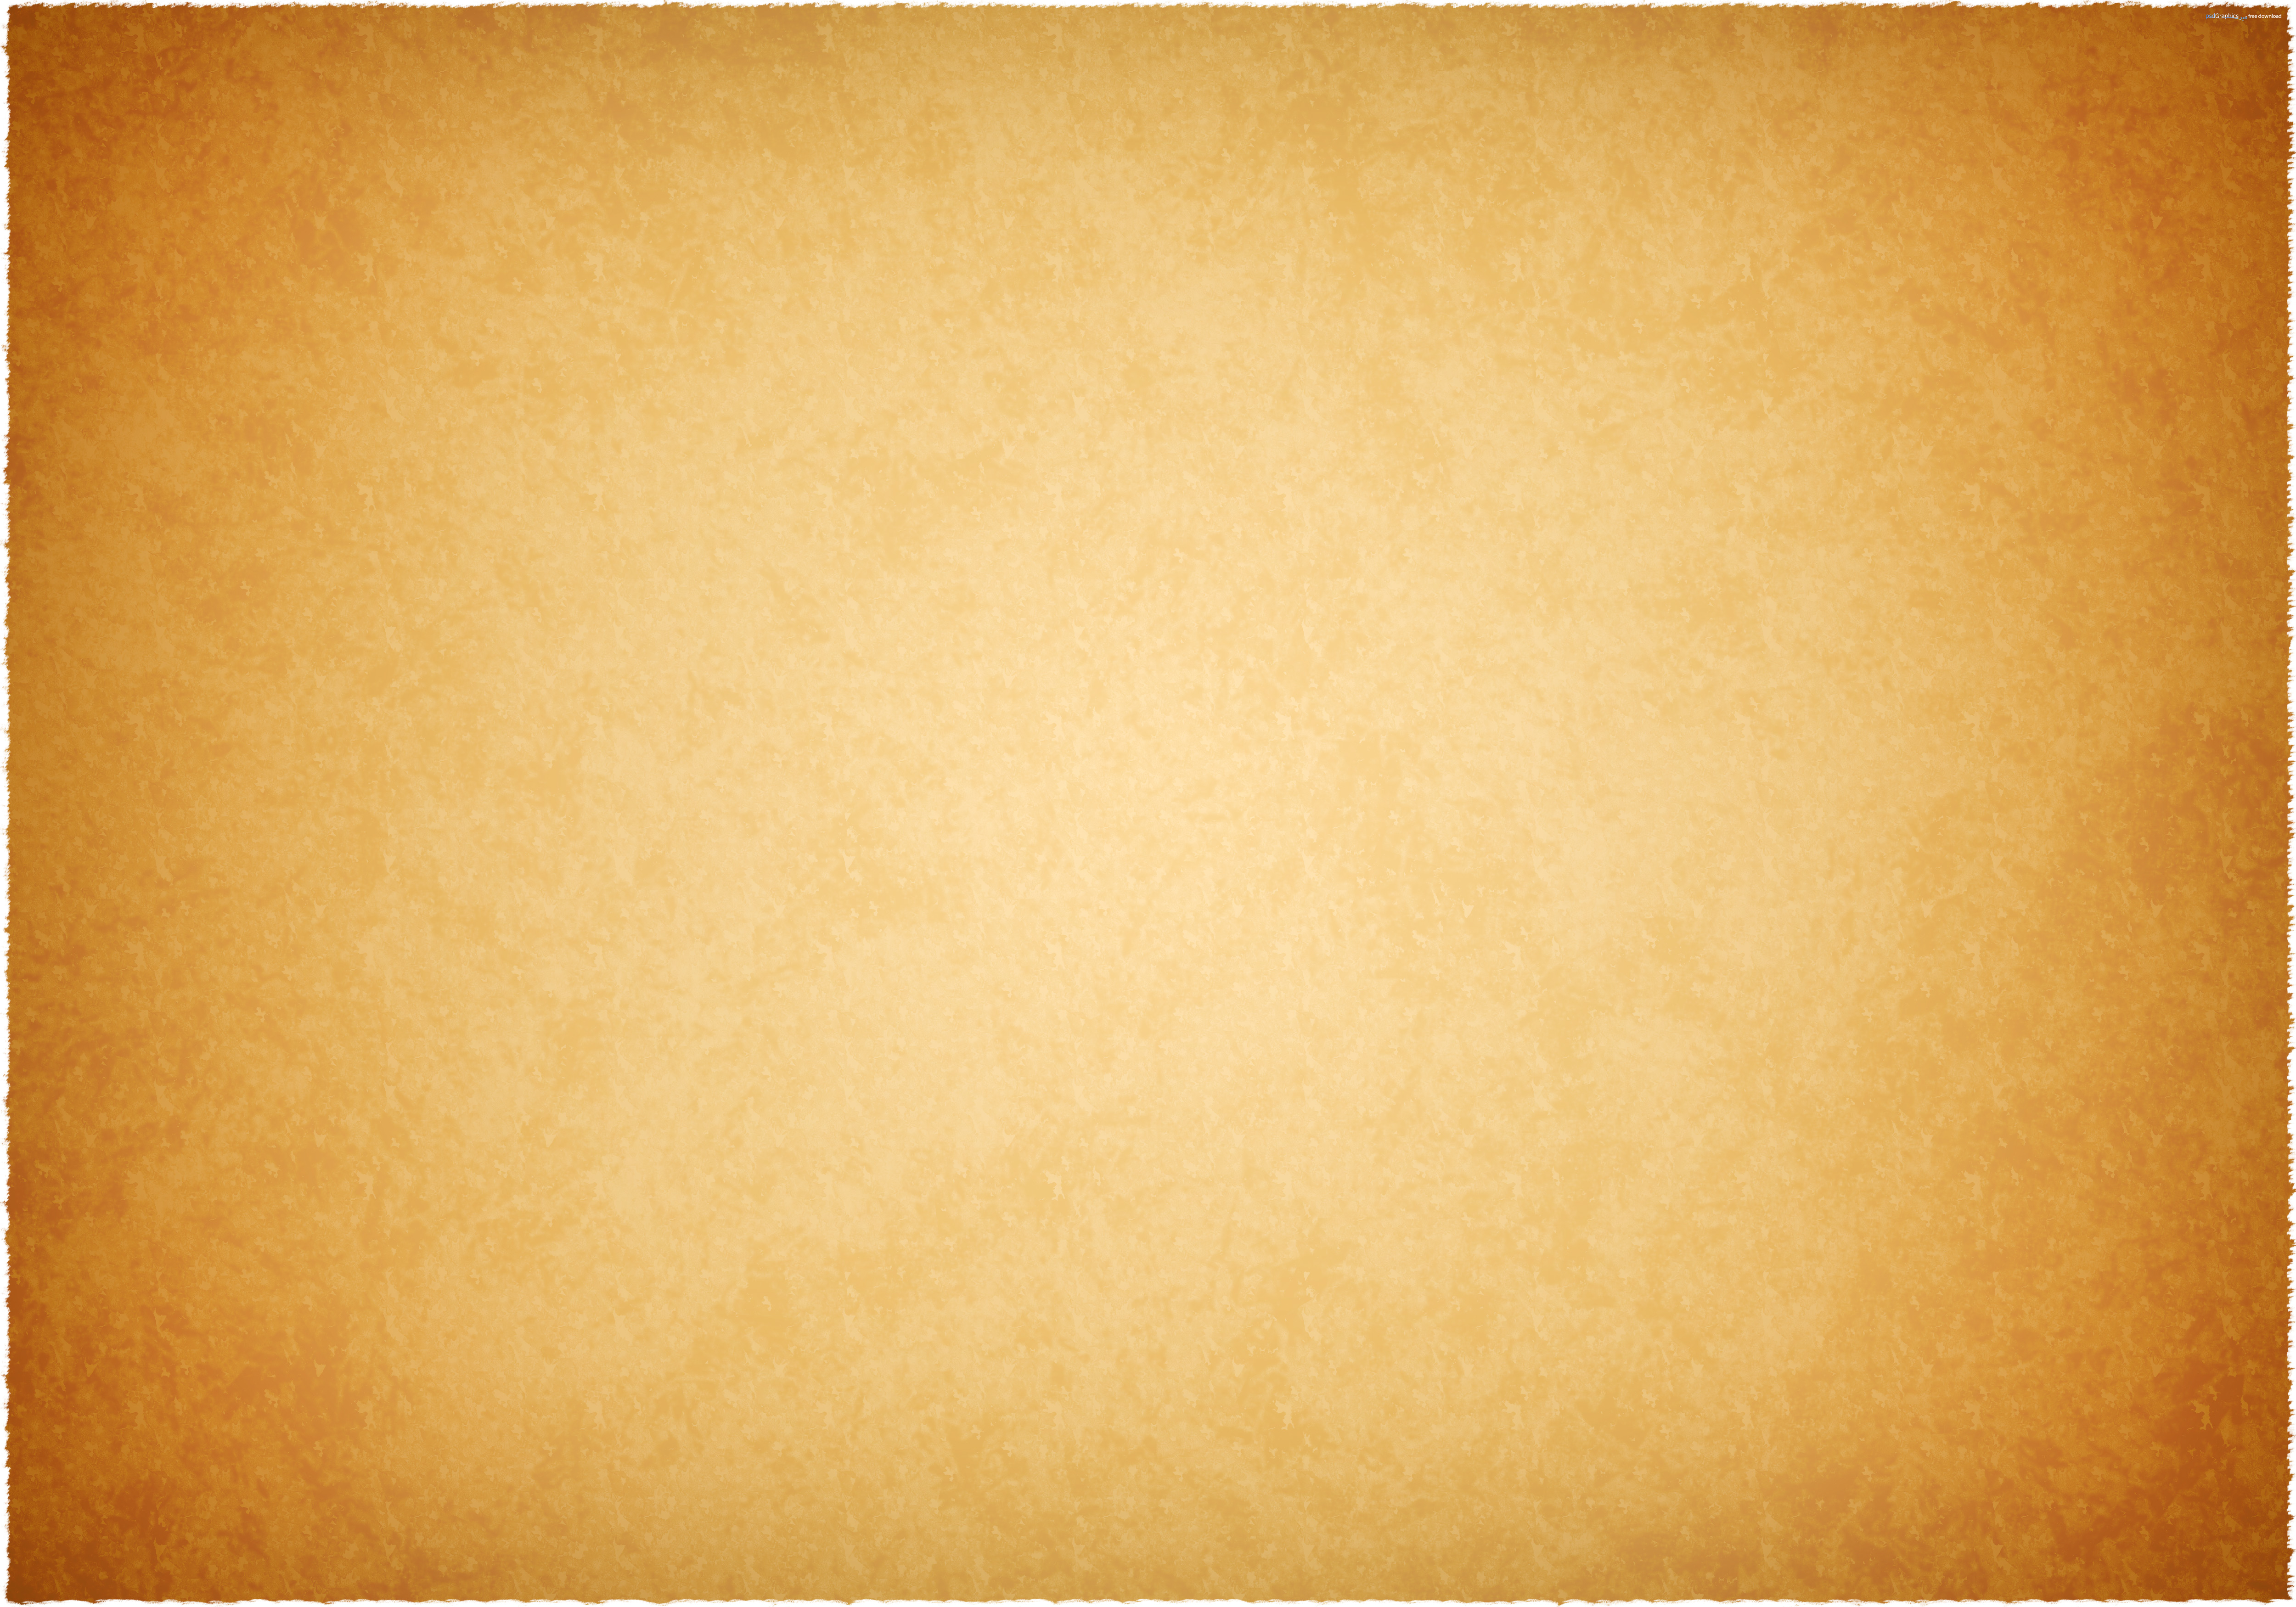 Old paper texture with a rough edges 5000x3500